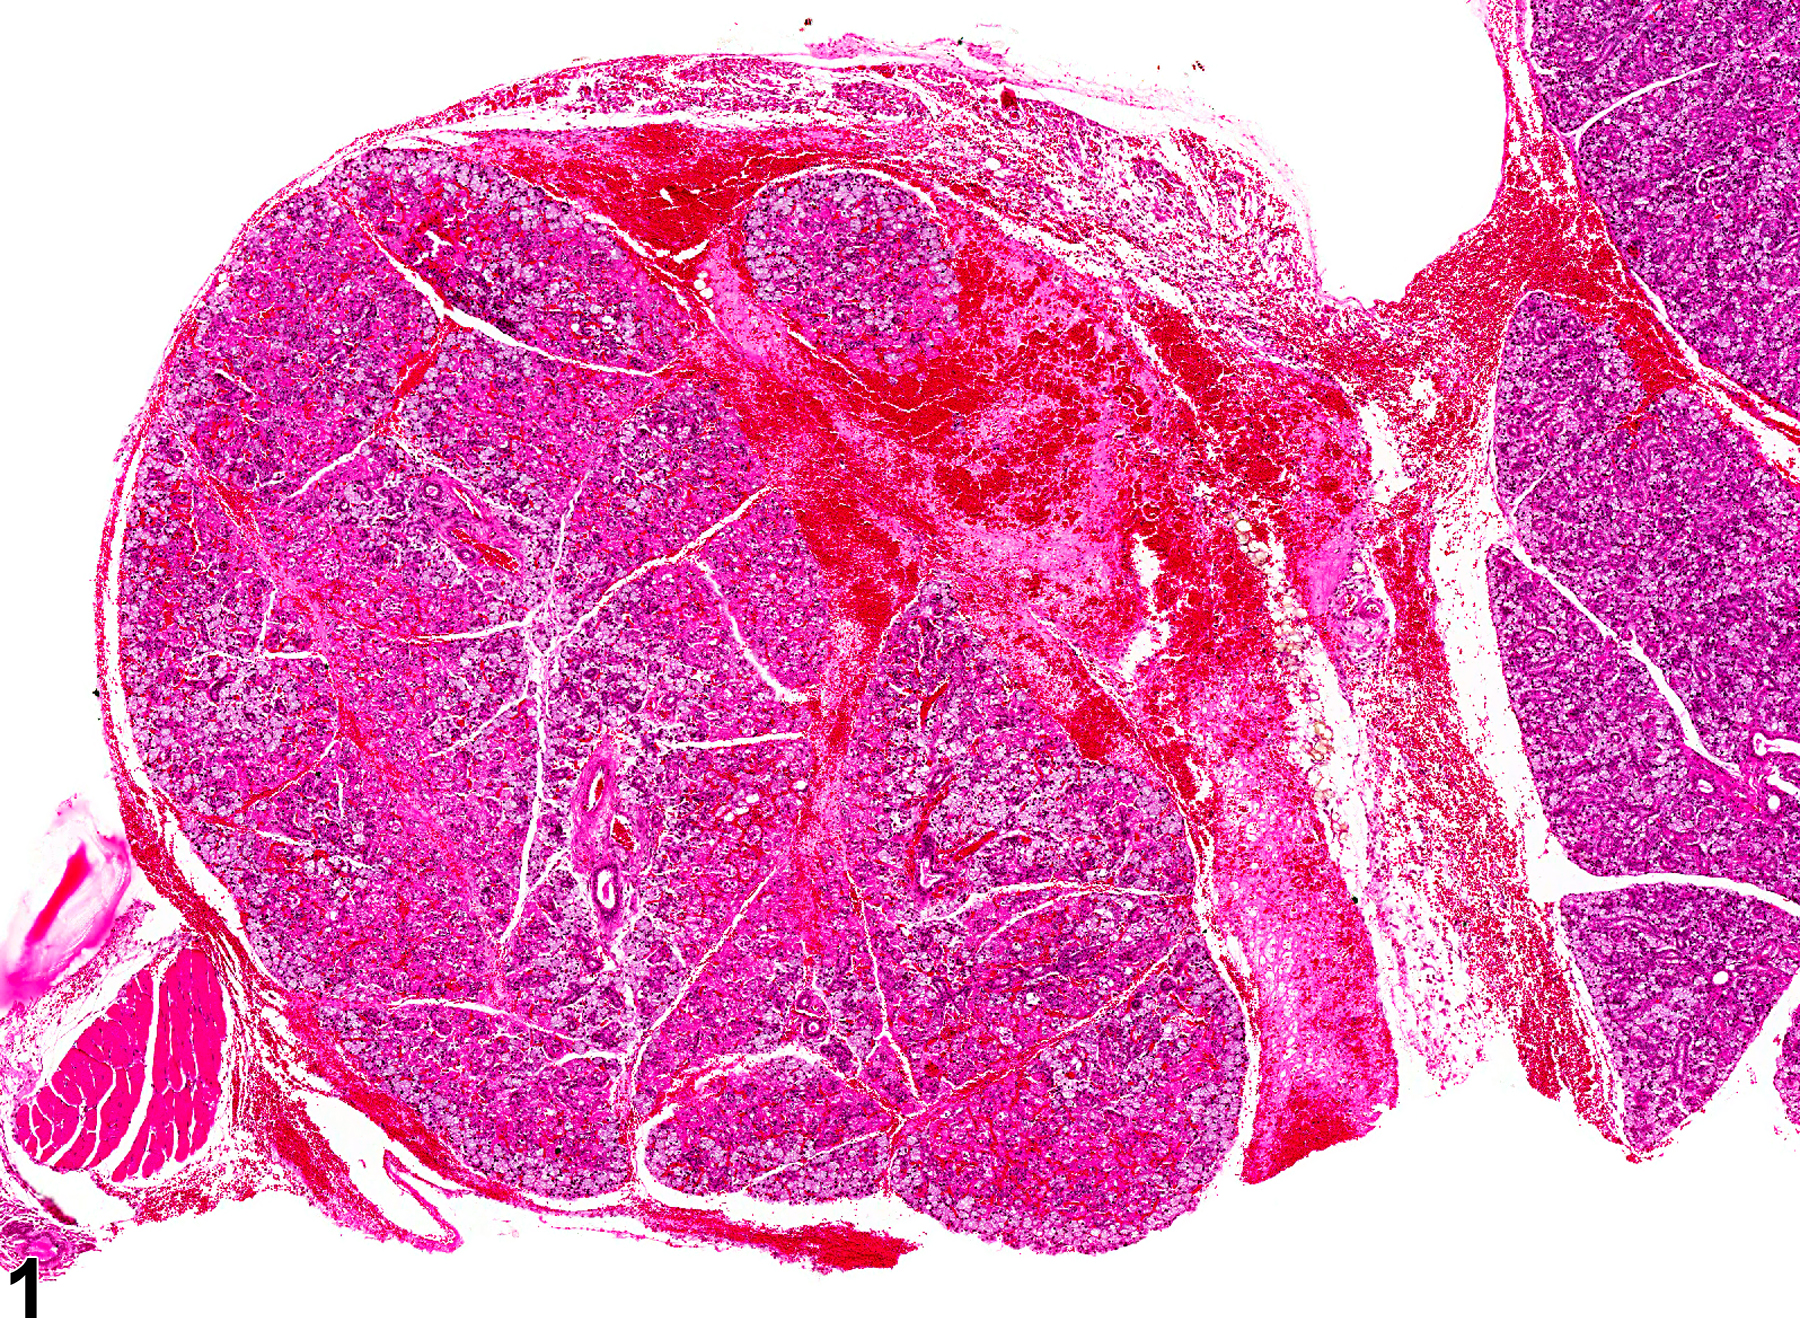 Image of hemorrhage in the salivary gland from a female B6C3F1 mouse in a chronic study